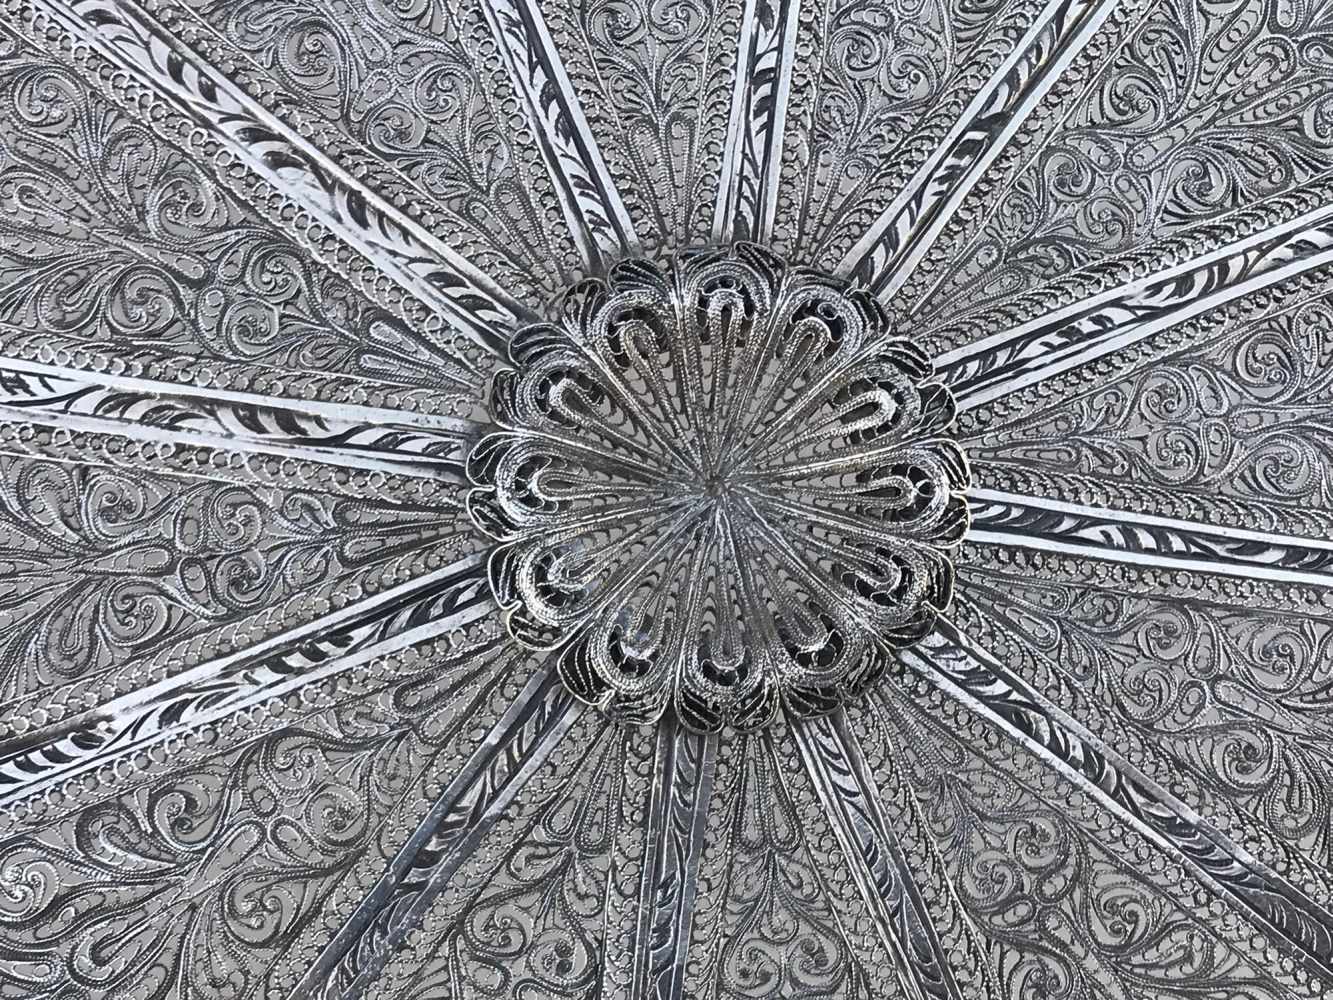 Silver filigree and embossed centre. Indo Portuguese. Possibly Goa. 18th - 19th centuries - Image 3 of 5